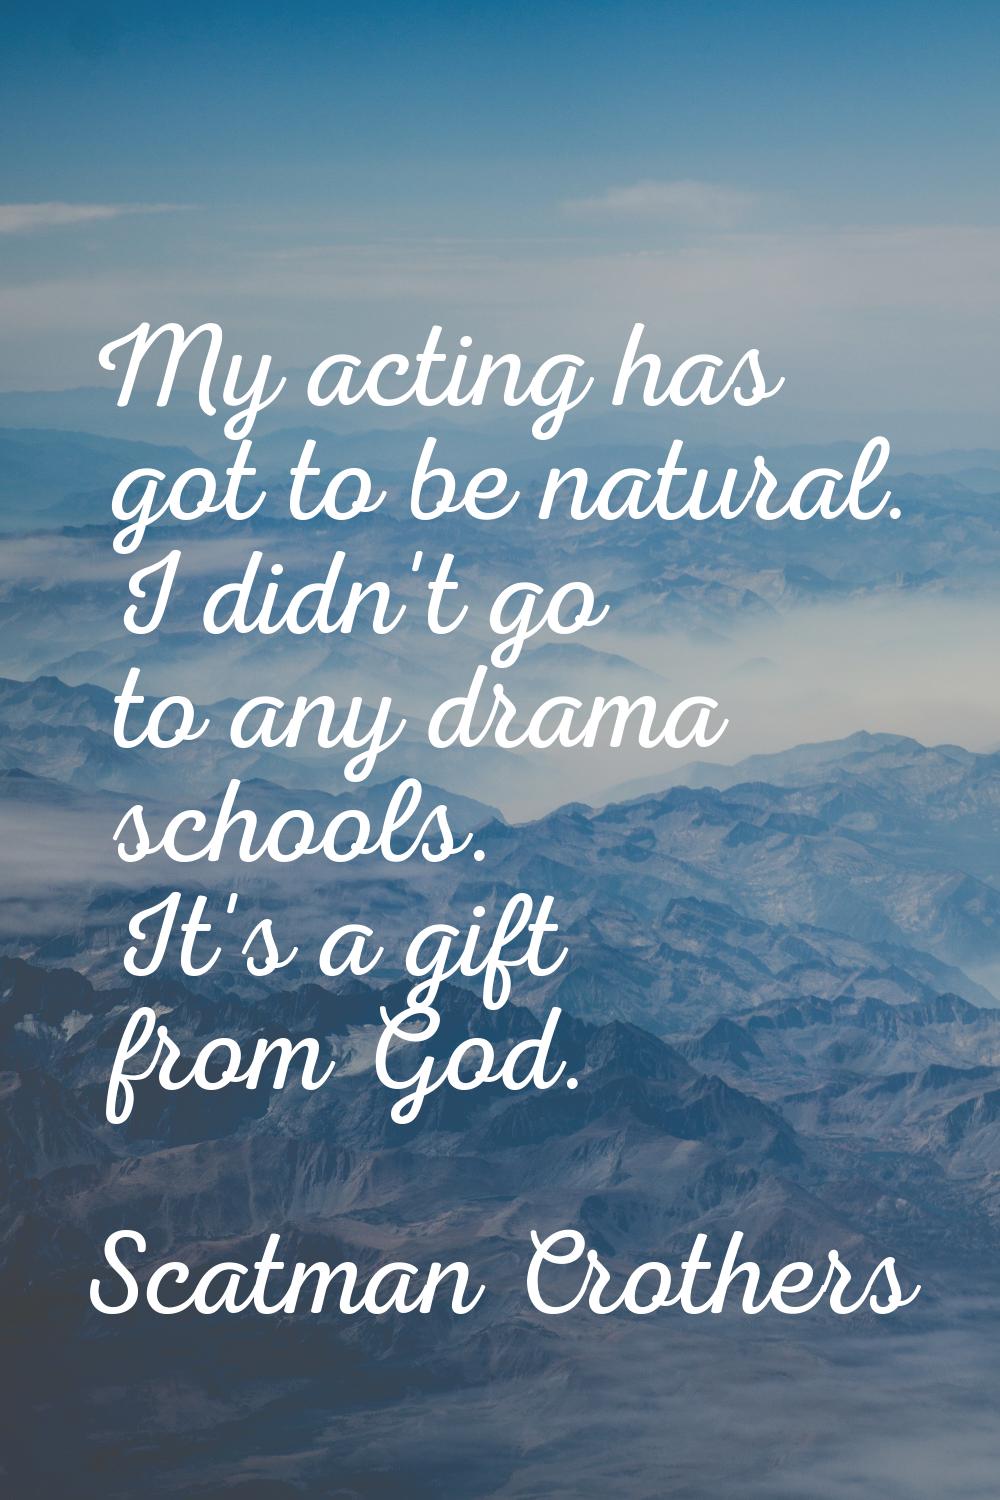 My acting has got to be natural. I didn't go to any drama schools. It's a gift from God.